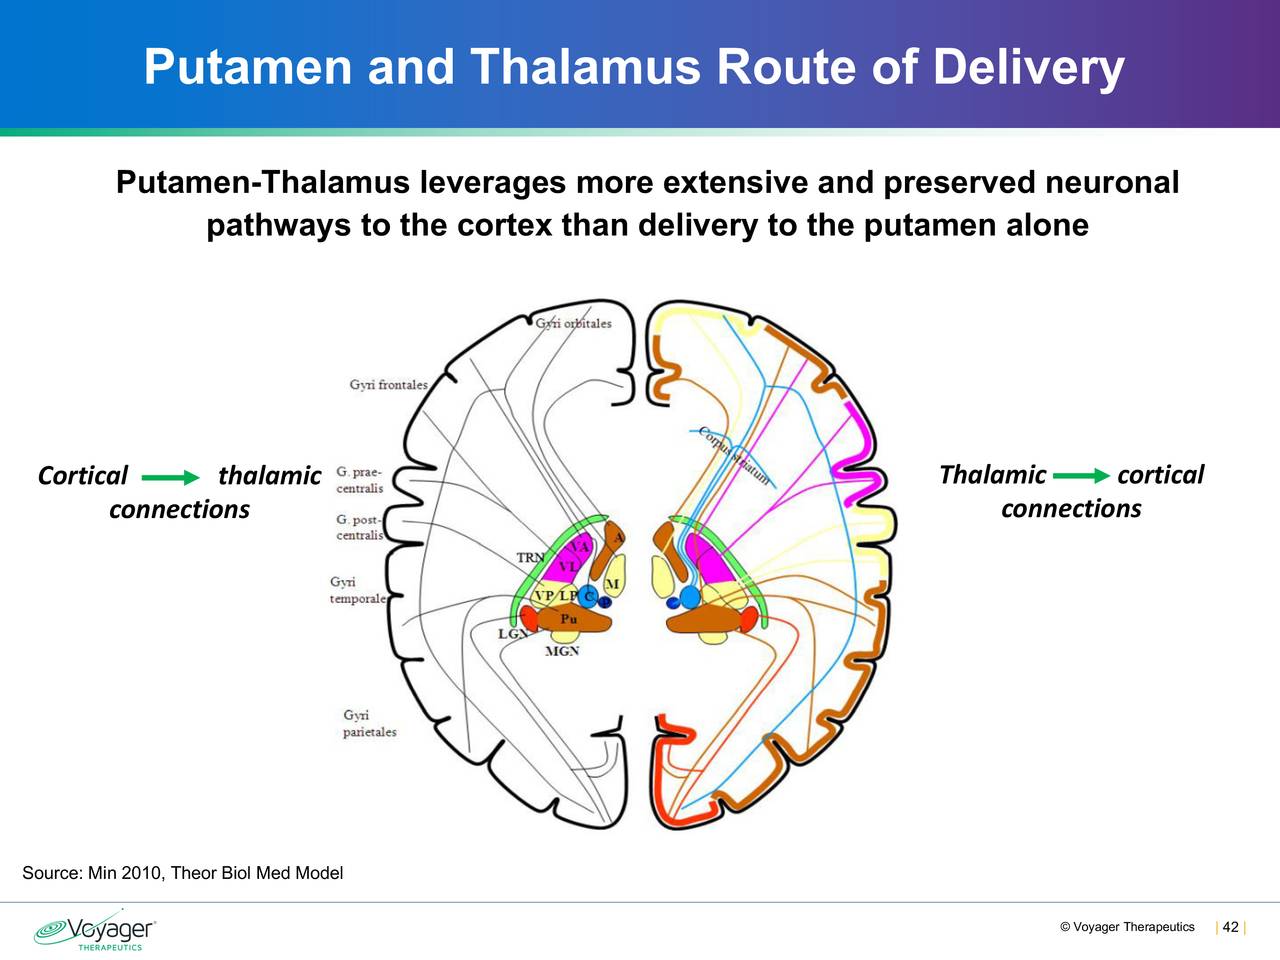 Putamen and Thalamus Route of Delivery